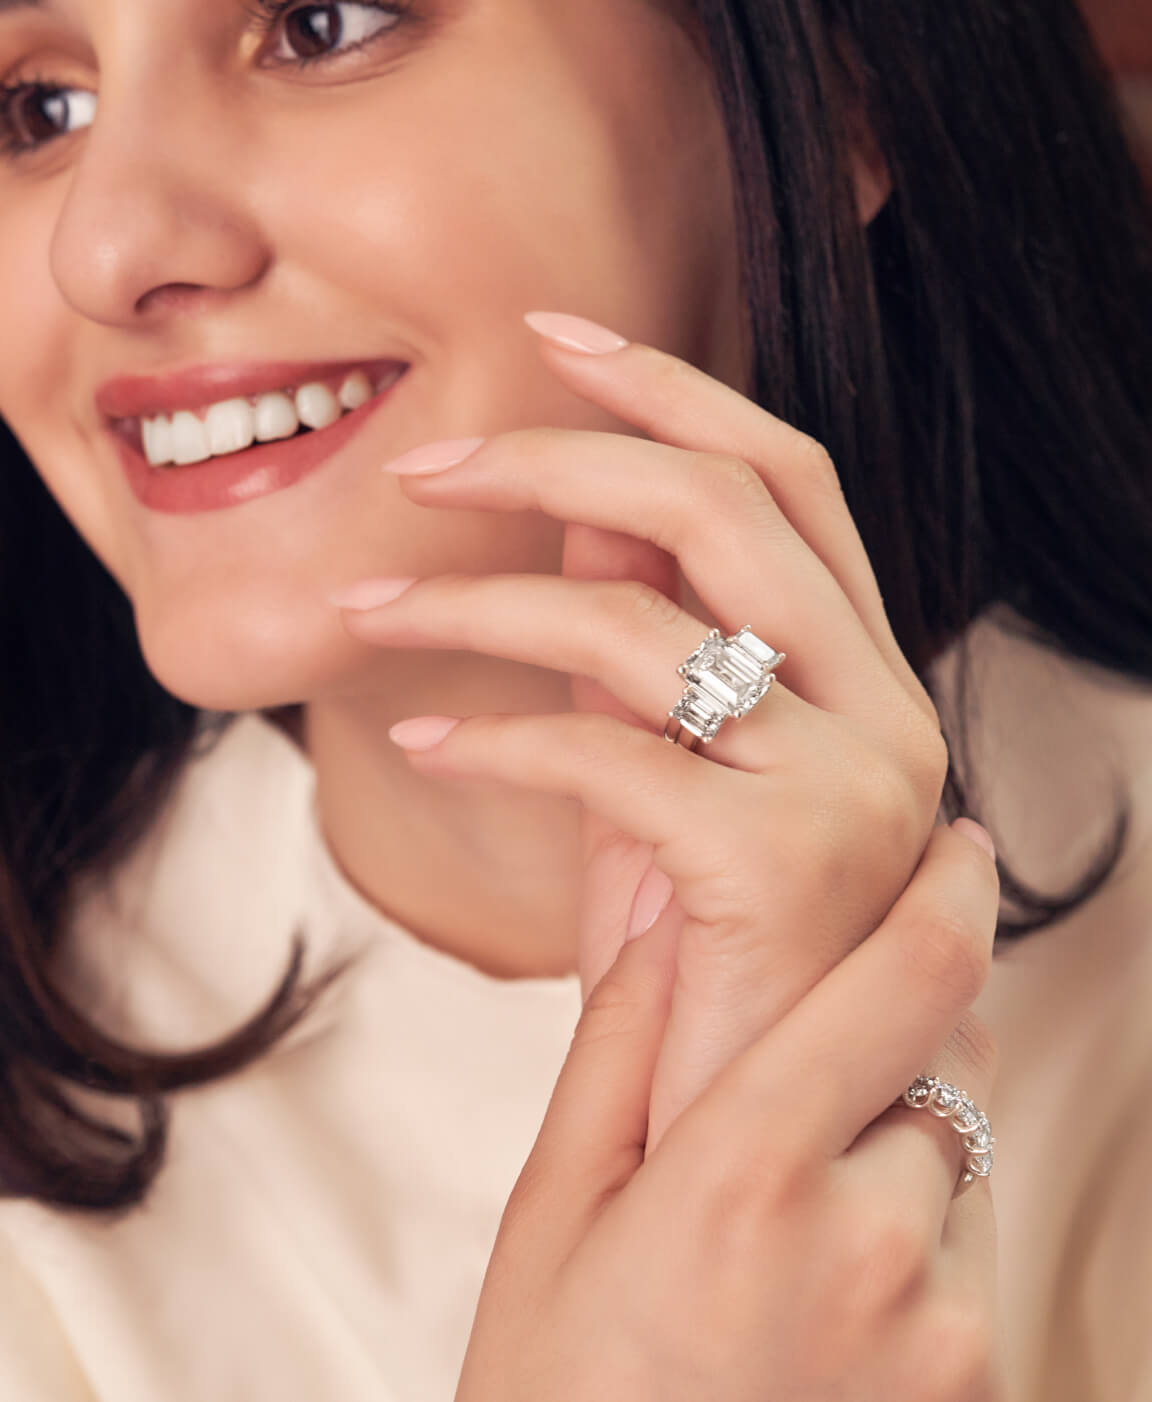 Why Choose a 2 Carat Solitaire Diamond Ring for Your Engagement?